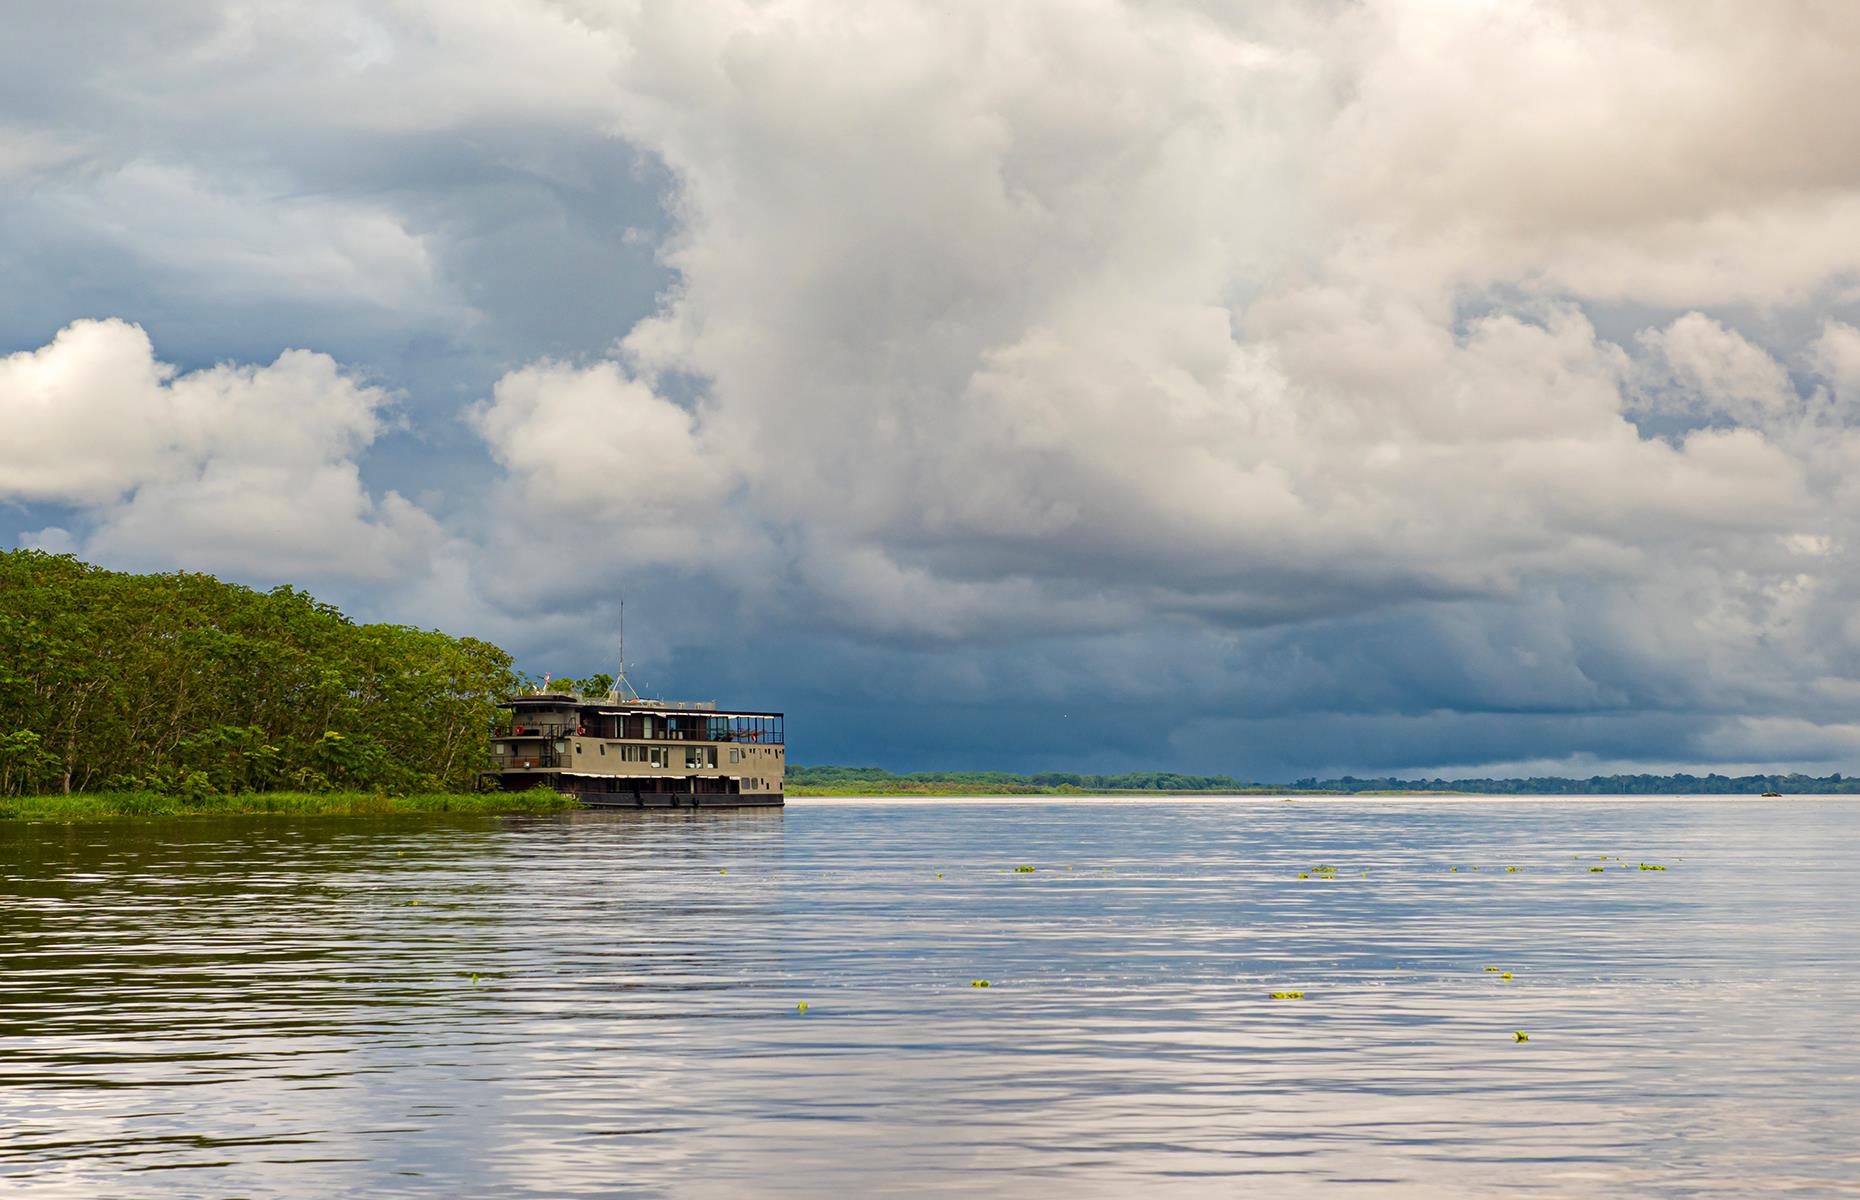 <p>More river cruise lines are heading to remote rivers. One example is <a href="https://www.seabourn.com/en_US.html">Seabourn</a>. In 2023 the line launches a 14-day Wild Guianas To The Amazon Basin cruise, which sails along Brazil’s Guajará River, a tributary of the Amazon. Excursions include a trip to meet local Indigenous groups – a reminder that Amazon river cruises are great options for getting off the beaten path.</p>